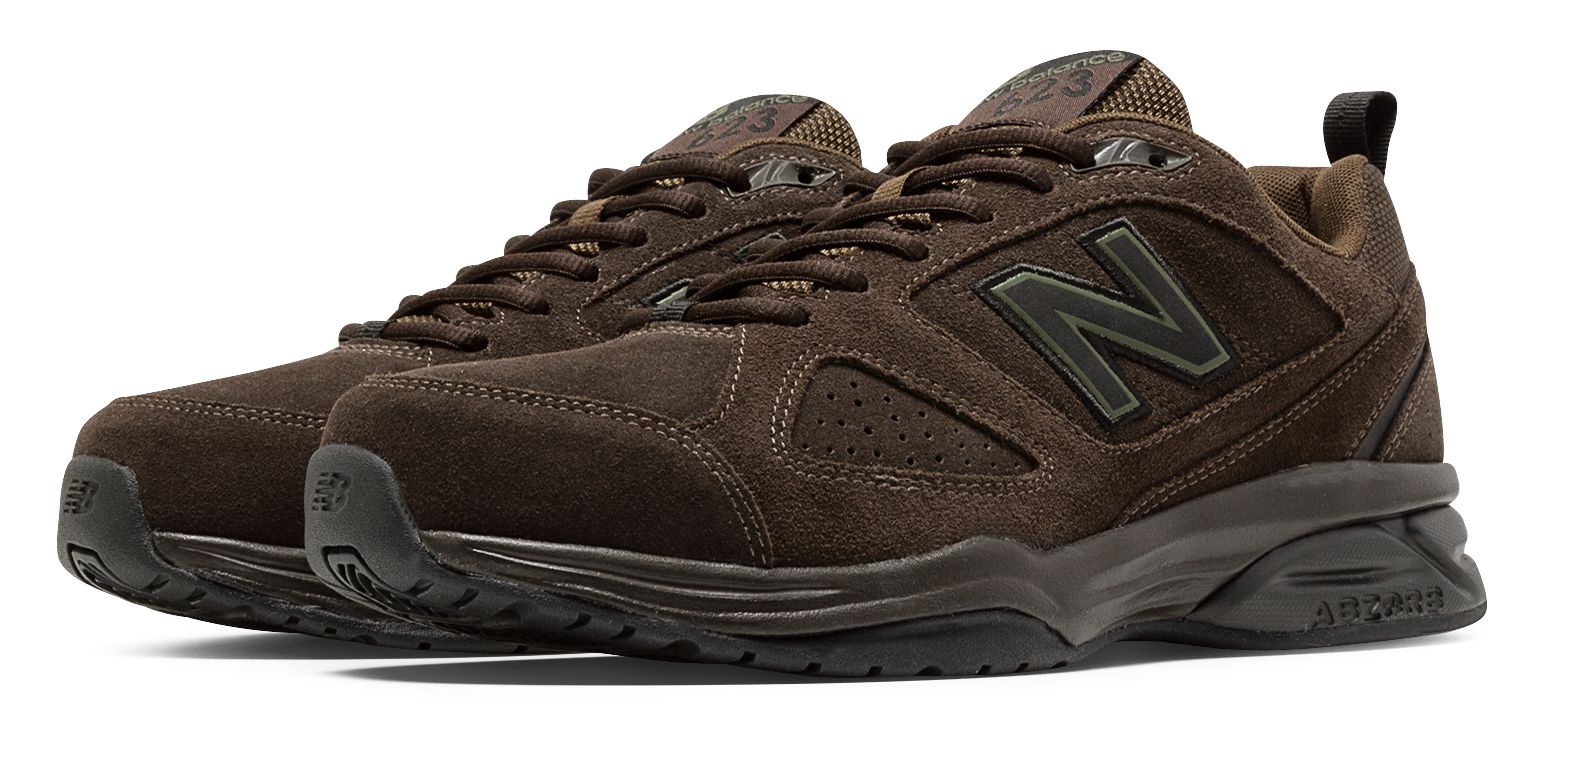 mx623 Search Results - 2 Results Found | New Balance USA